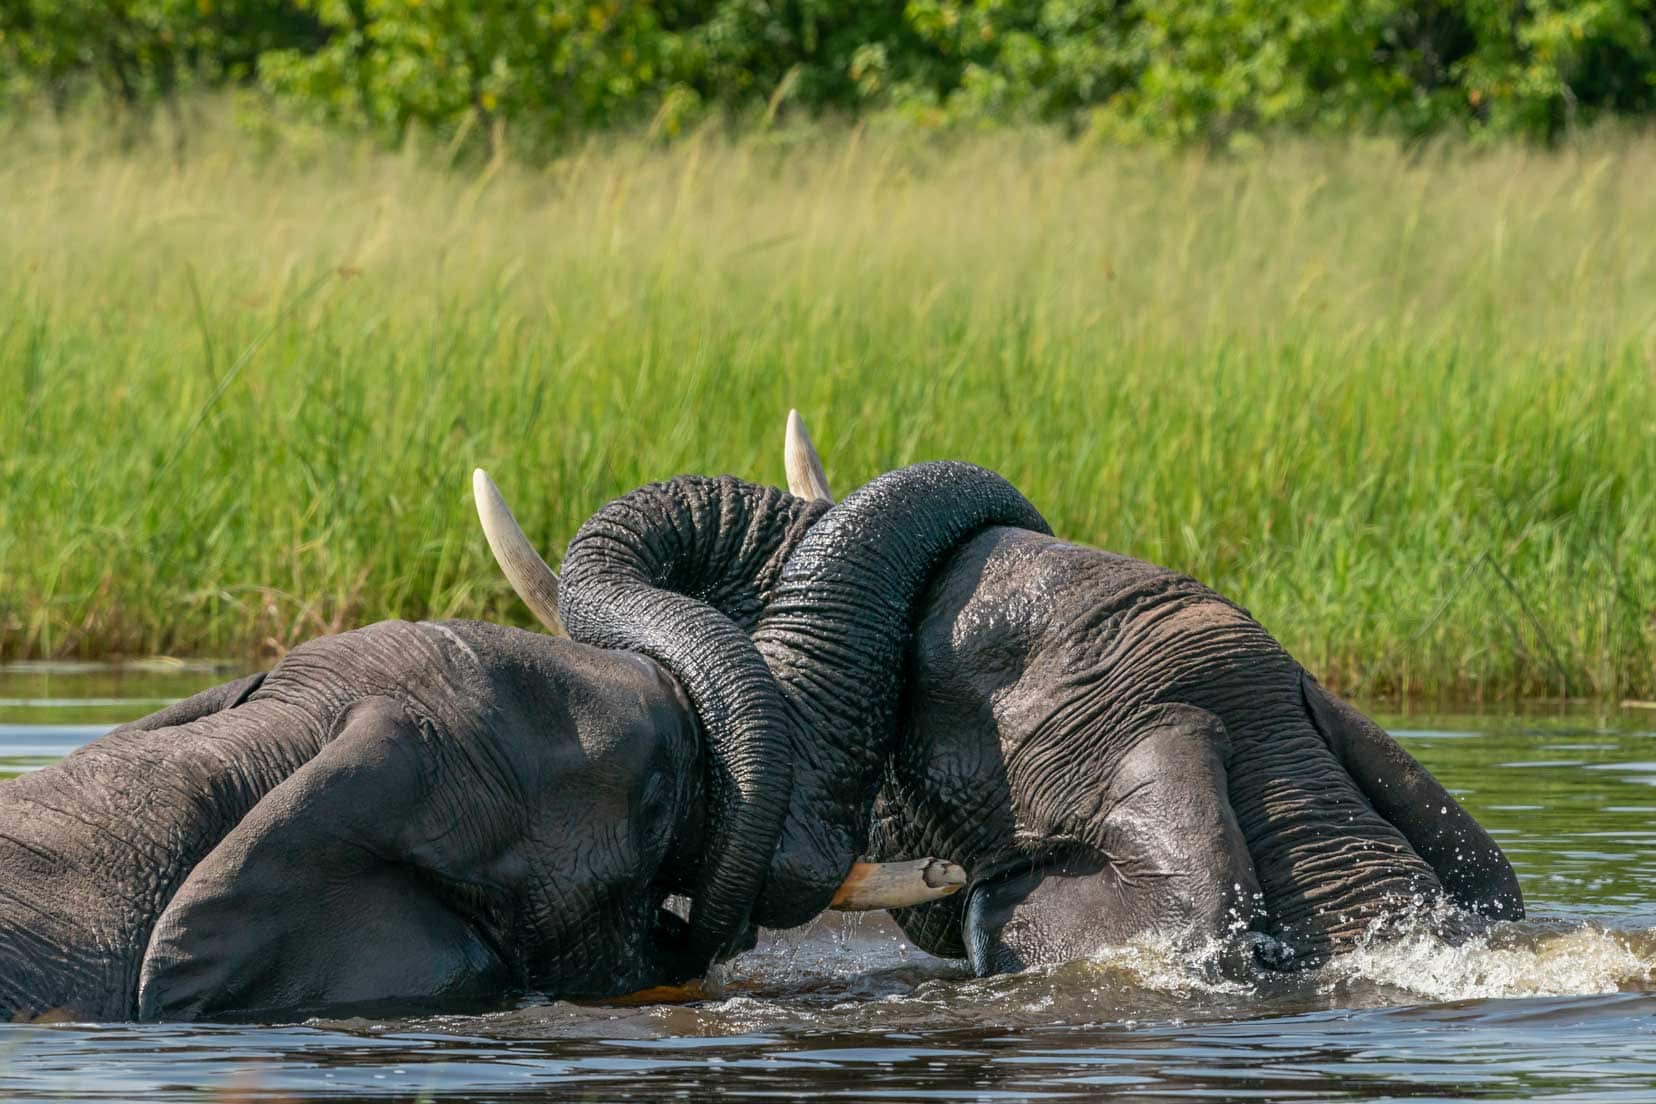 two elephants tussling in the water